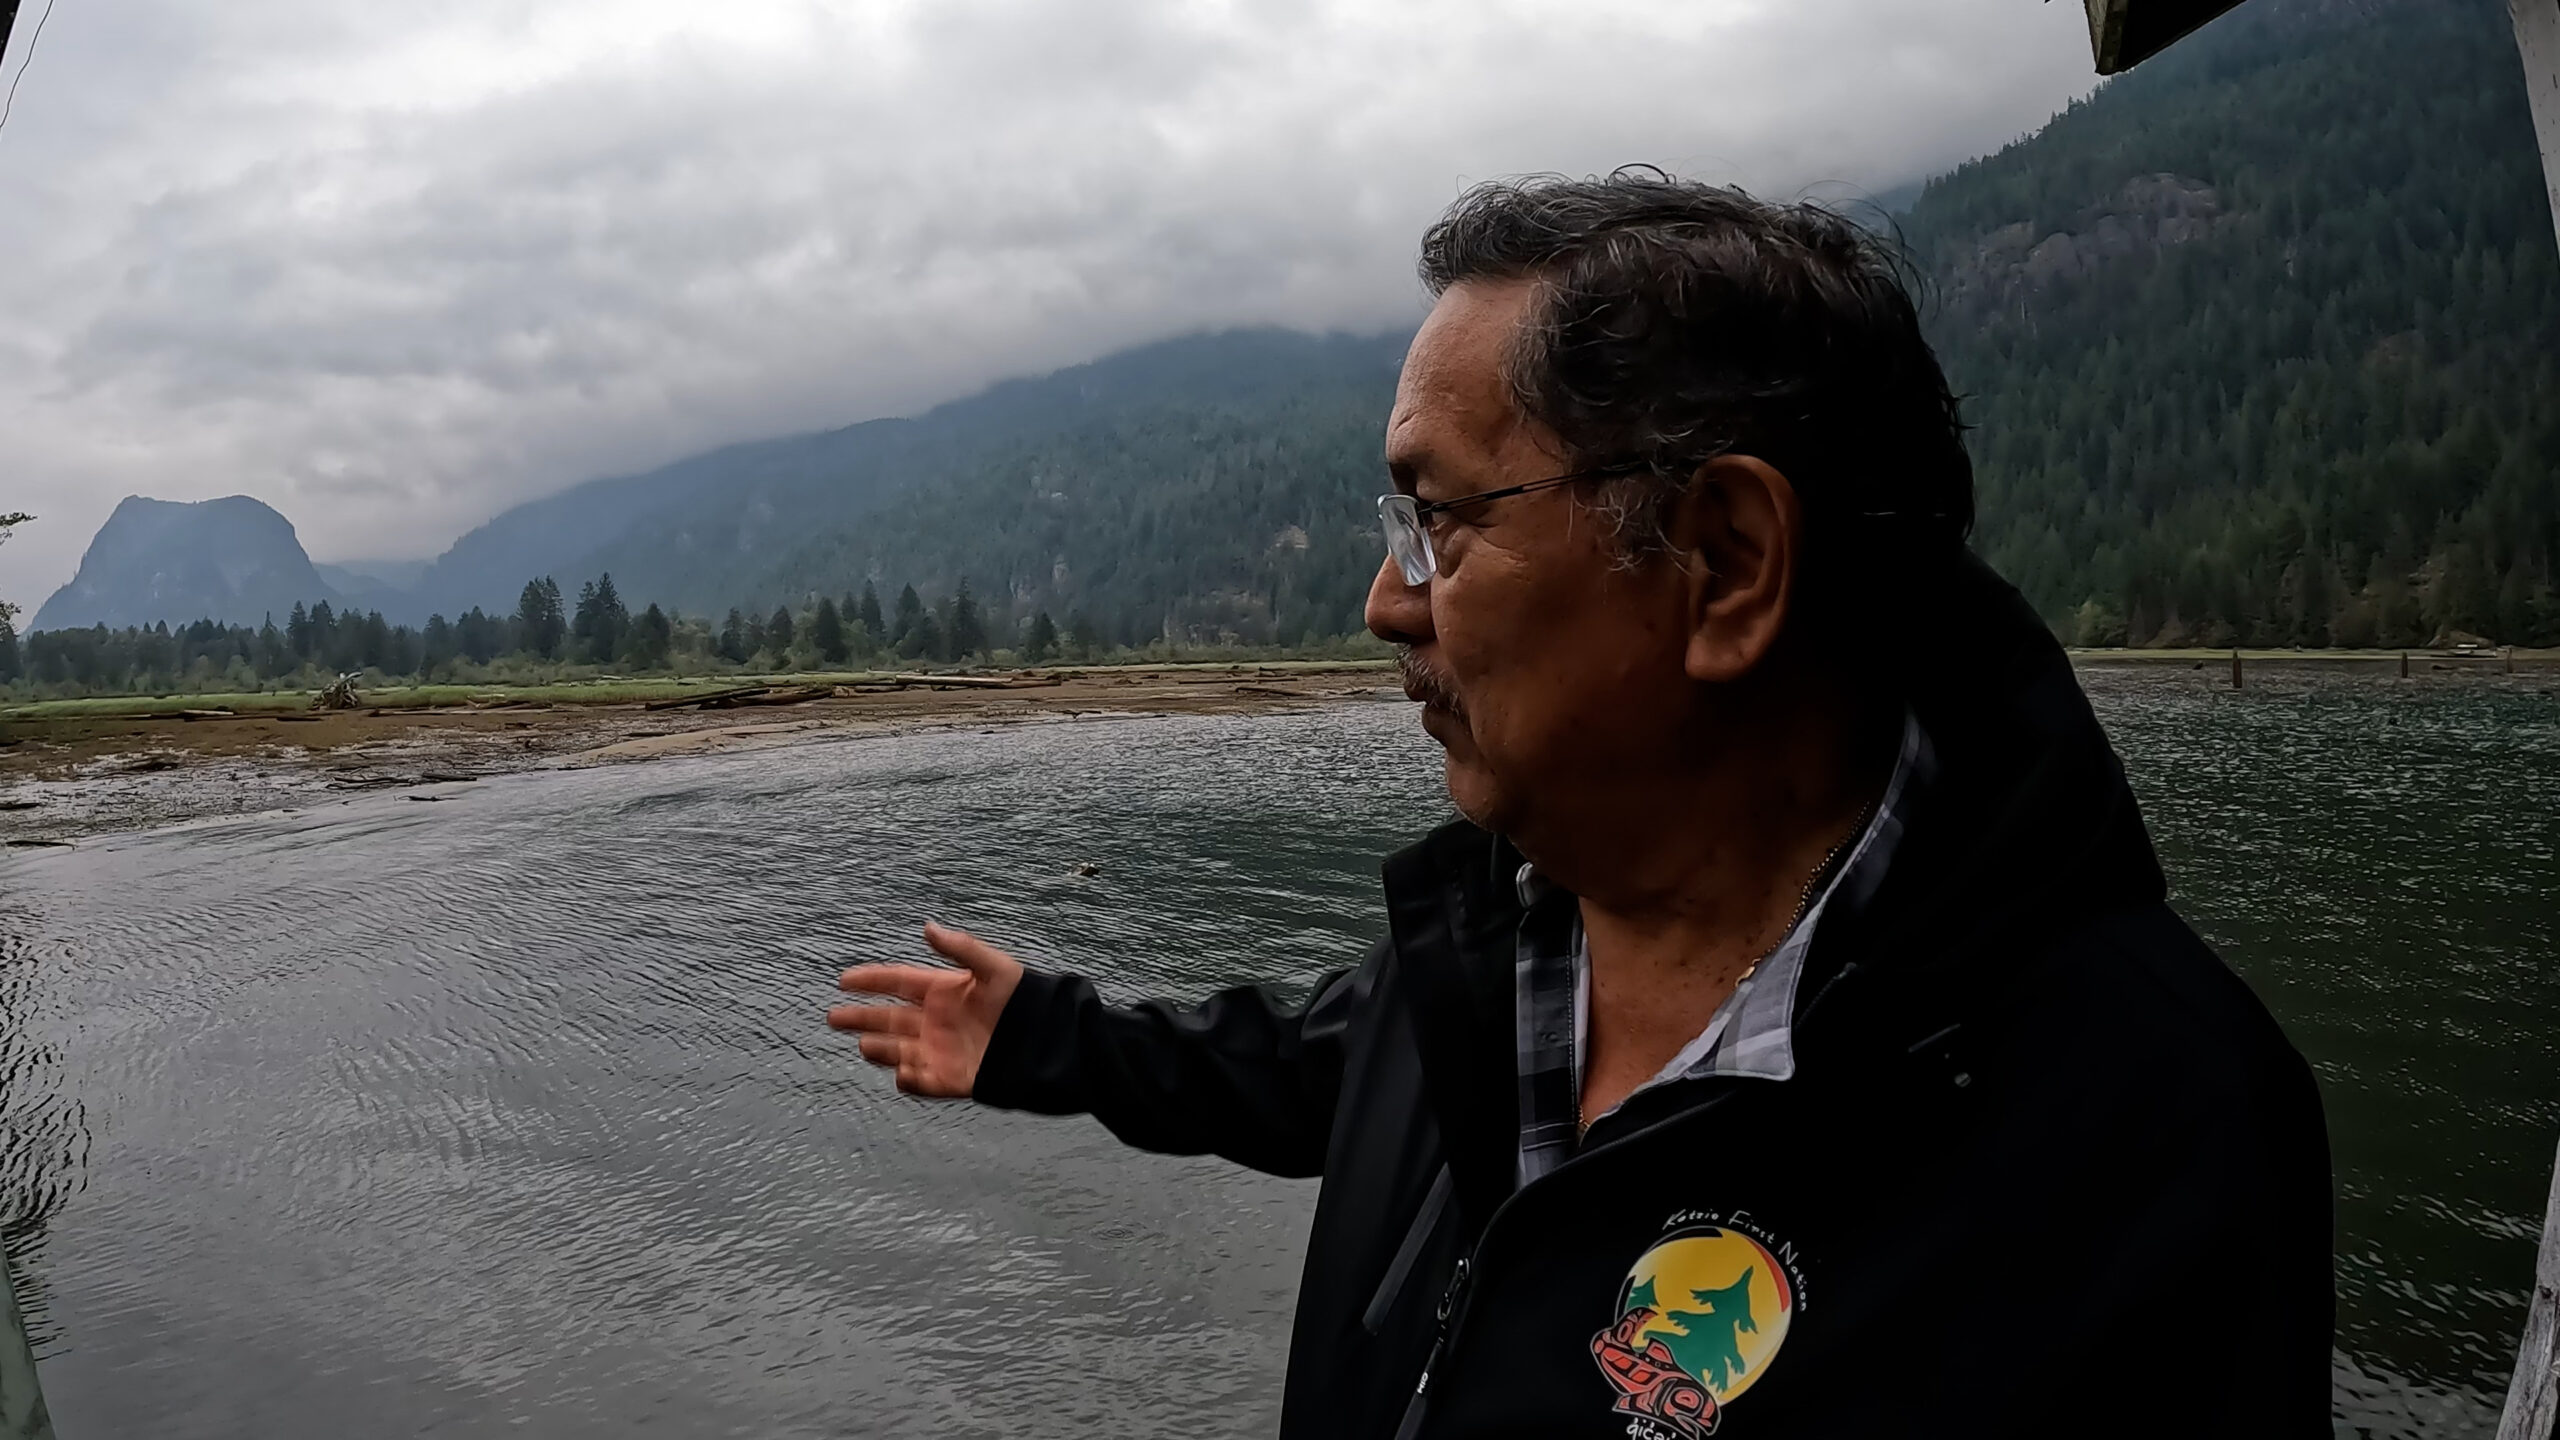 Katzie First Nation man pointing at a body of water with mountains in background